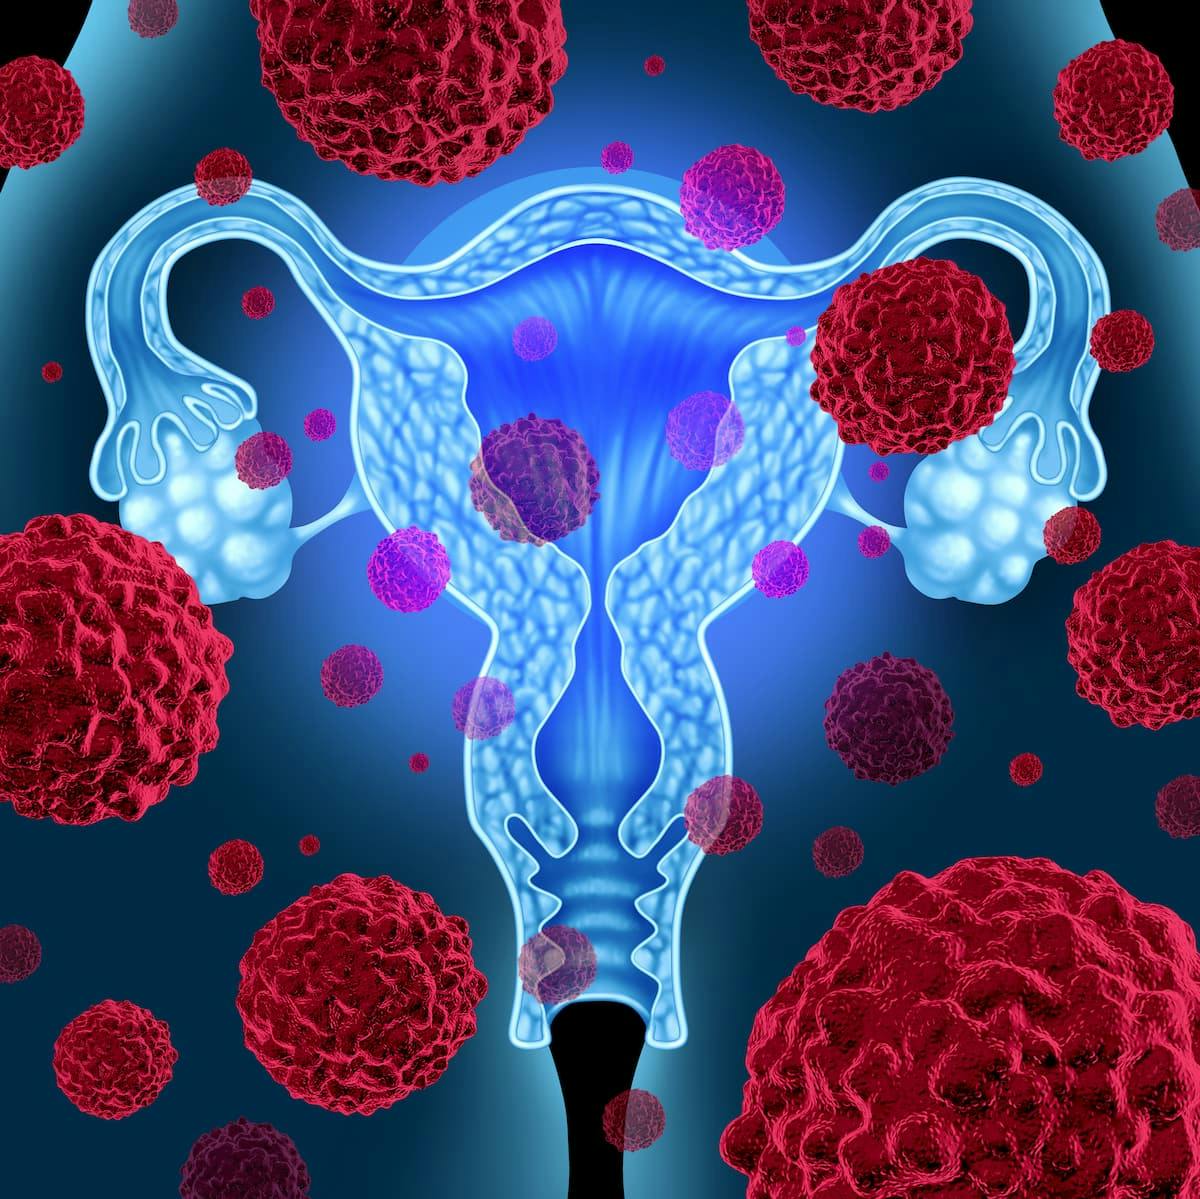 Currently, dostarlimab has conditional approval as a monotherapy for treating adult patients with dMMR/MSI-H, recurrent or advanced endometrial cancer that has progressed. If the European Commission approves dostarlimab plus chemotherapy, it is expected that the conditional approval will convert to a full approval. 